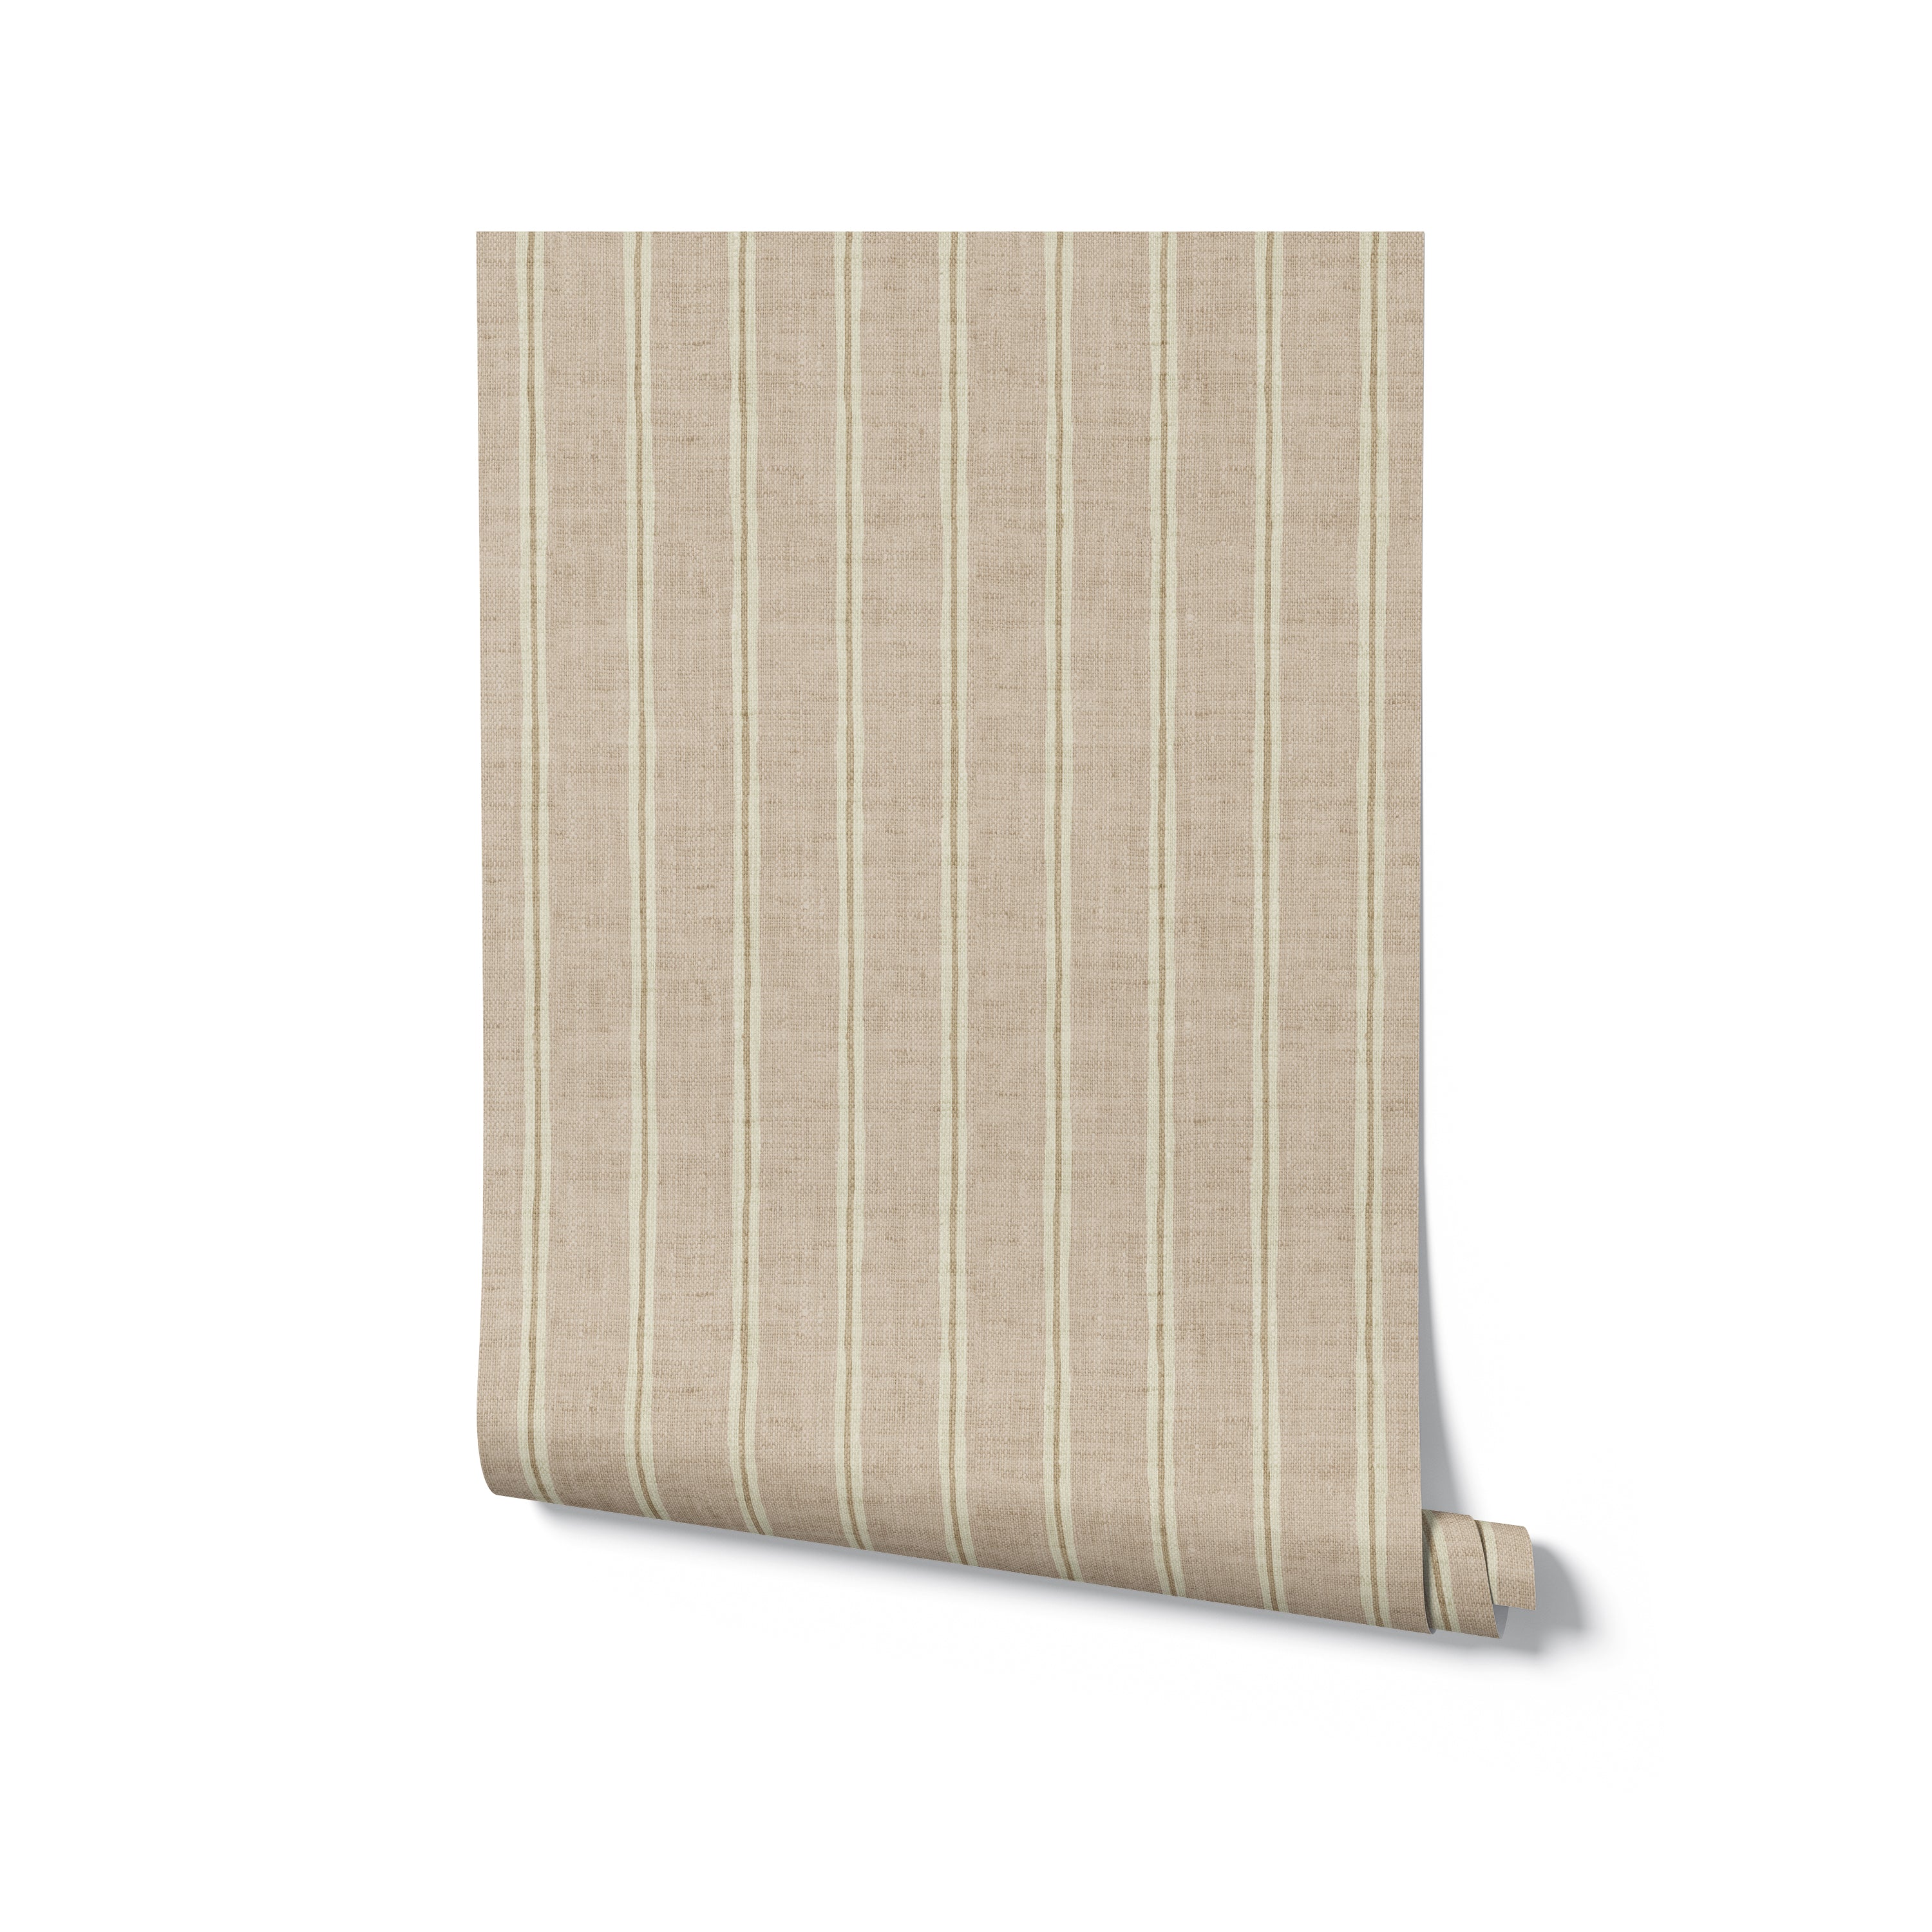 A roll of 'Ticking Fabrics 2 Wallpaper' leaning against a white background, highlighting the simple elegance of the beige and cream stripes. The wallpaper evokes a cozy, fabric-like look, perfect for adding a touch of classic design to a home.